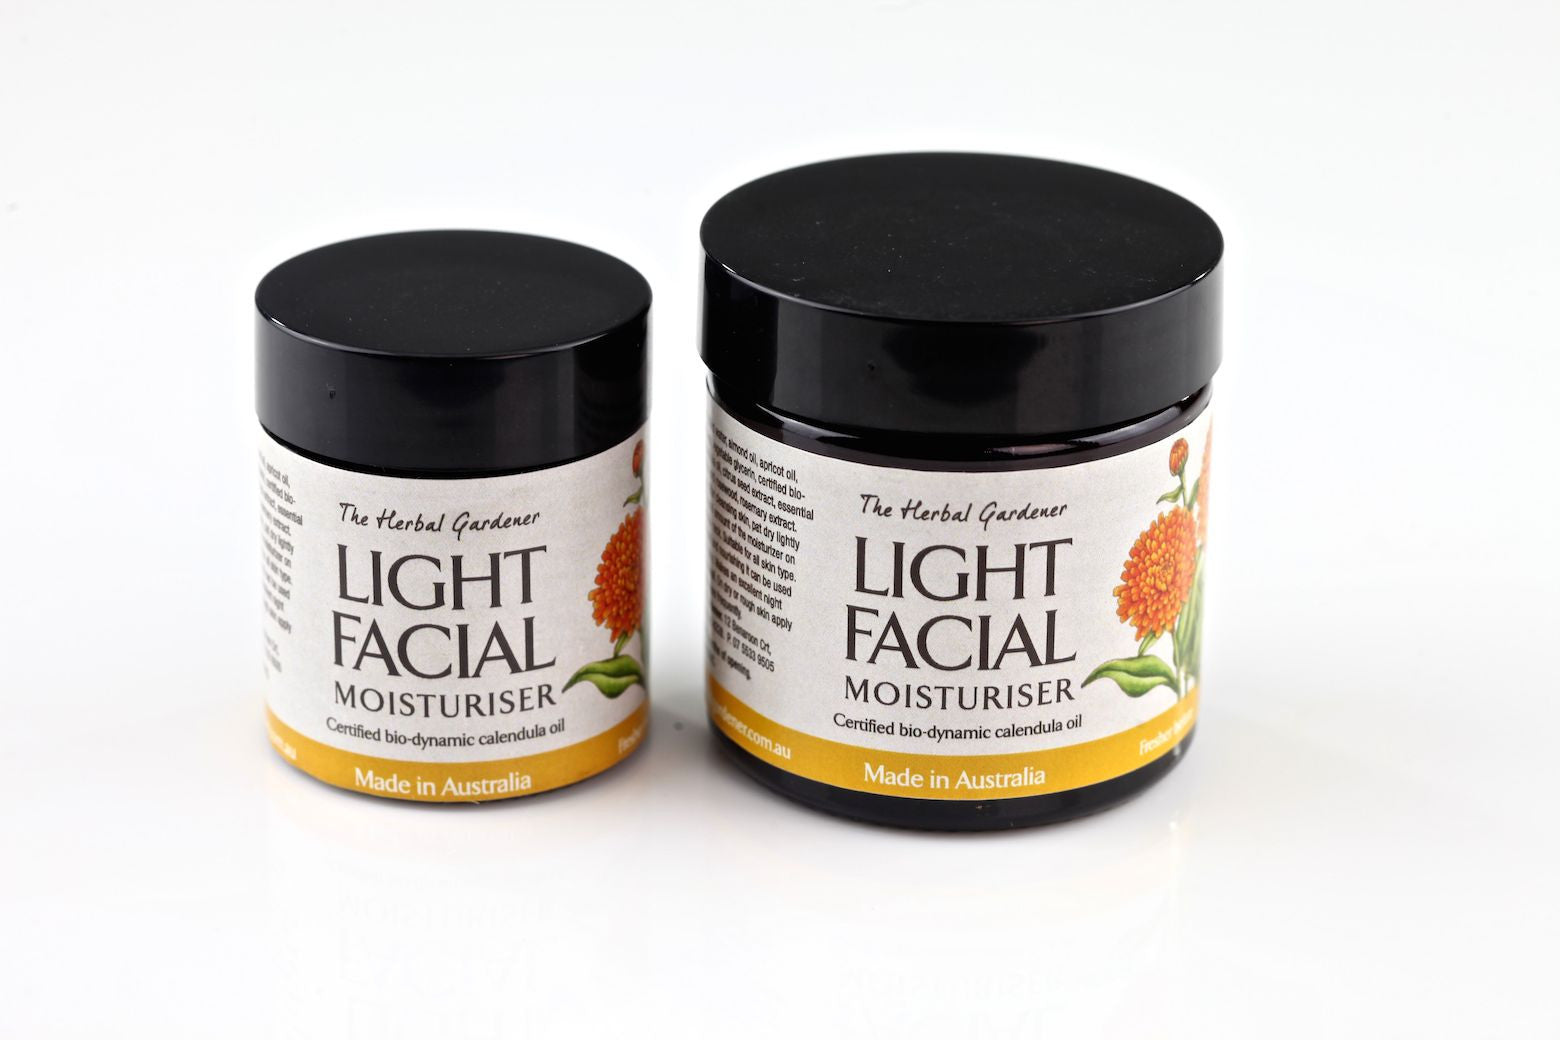 The Herbal Gardener, Light Facial Moisturiser with certified organic calendula oil benefit all skin as day cream, helps reduce signs of ageing & smooth fine lines, Australian made, helps teenager with acne, chemical free, helps repair, suitable for vegans.